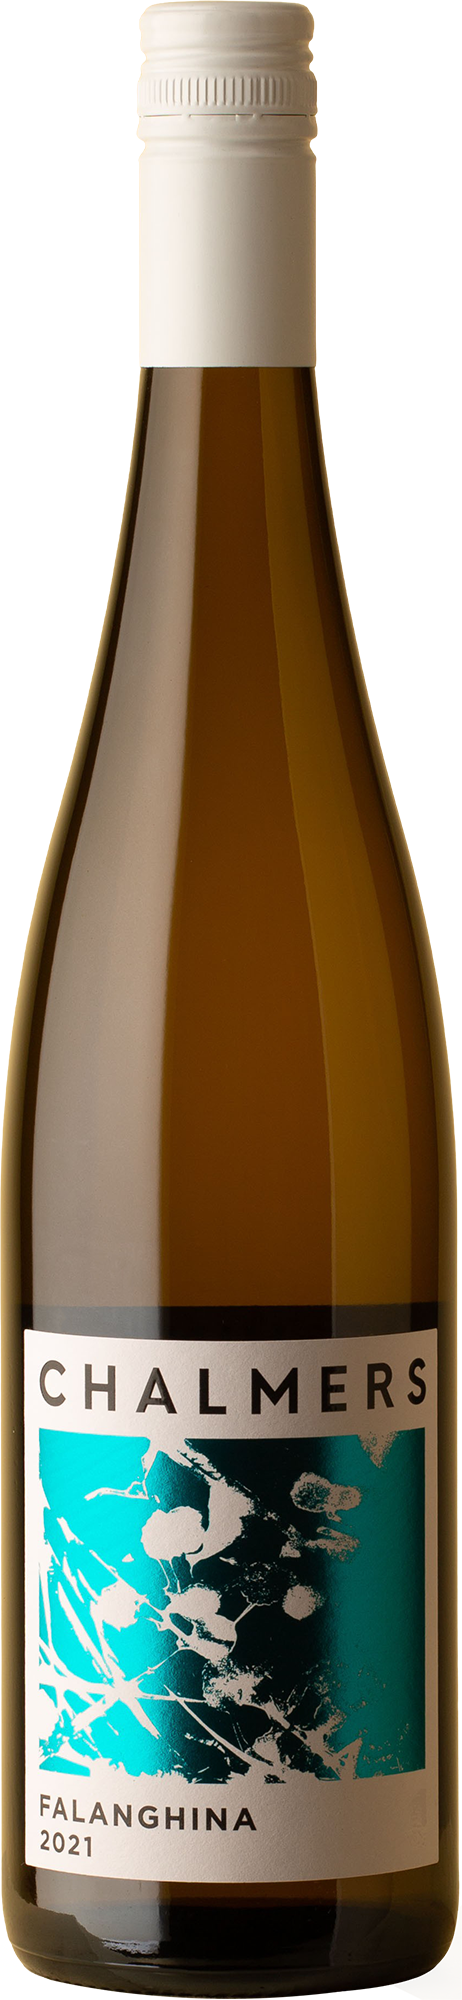 Chalmers - Falanghina 2021 White Wine